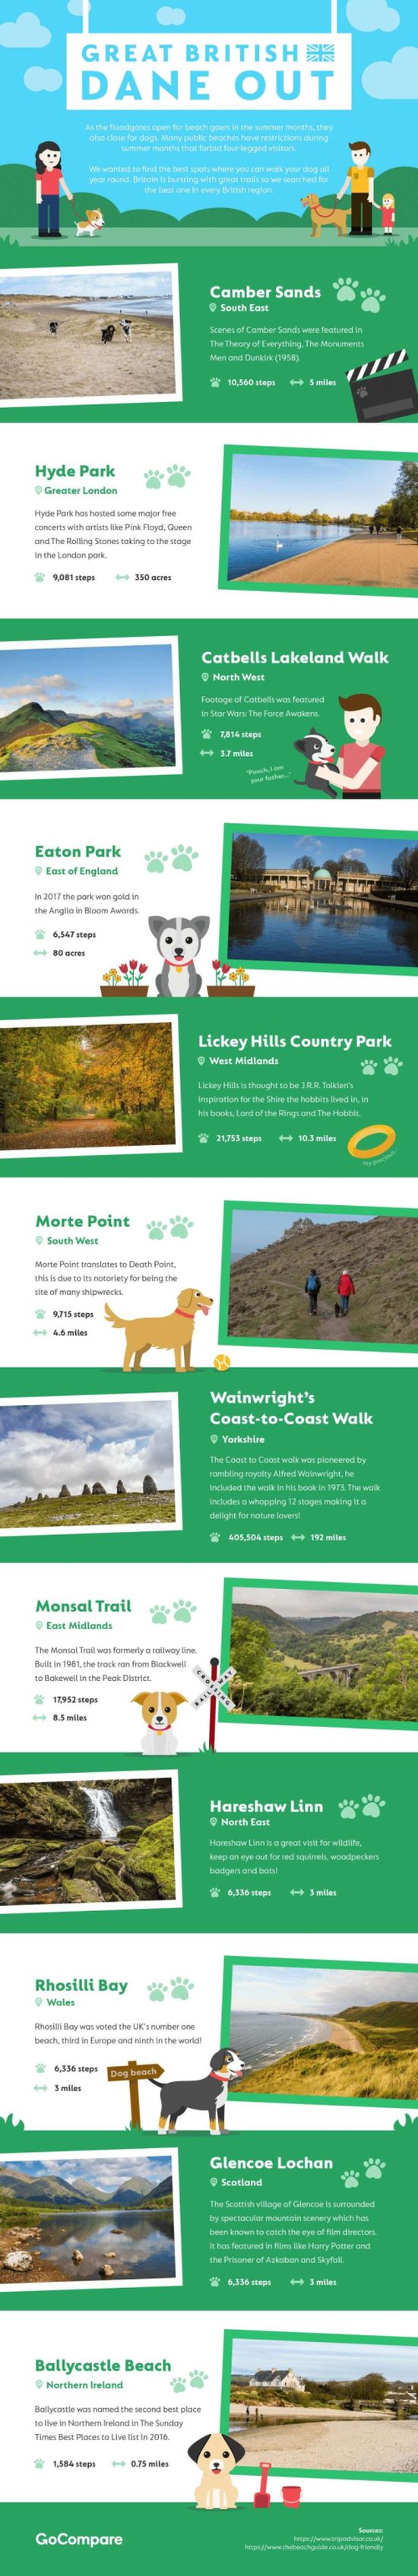 Top Dog Friendly Hiking Spots in the UK - Infographic